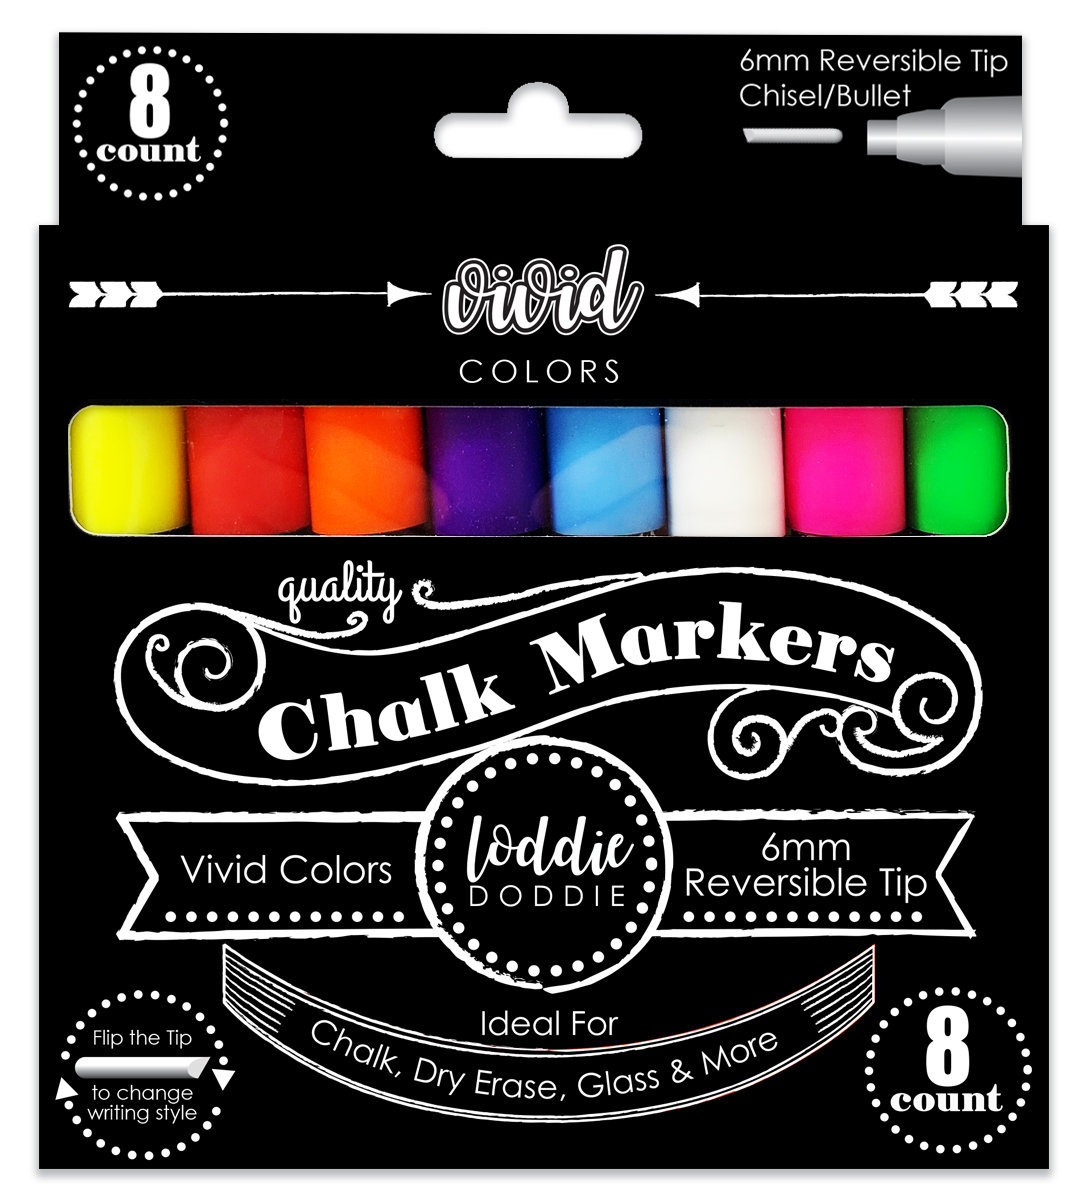  Fabric Chalk for Sewing Tailors Chalk, Tailor Chalk Fabric  Markers for Sewing, Fabric Chalk Sewing Made in Canada Wax Based Tailor's  Chalk by SEWTCO (White, 10 Pack)